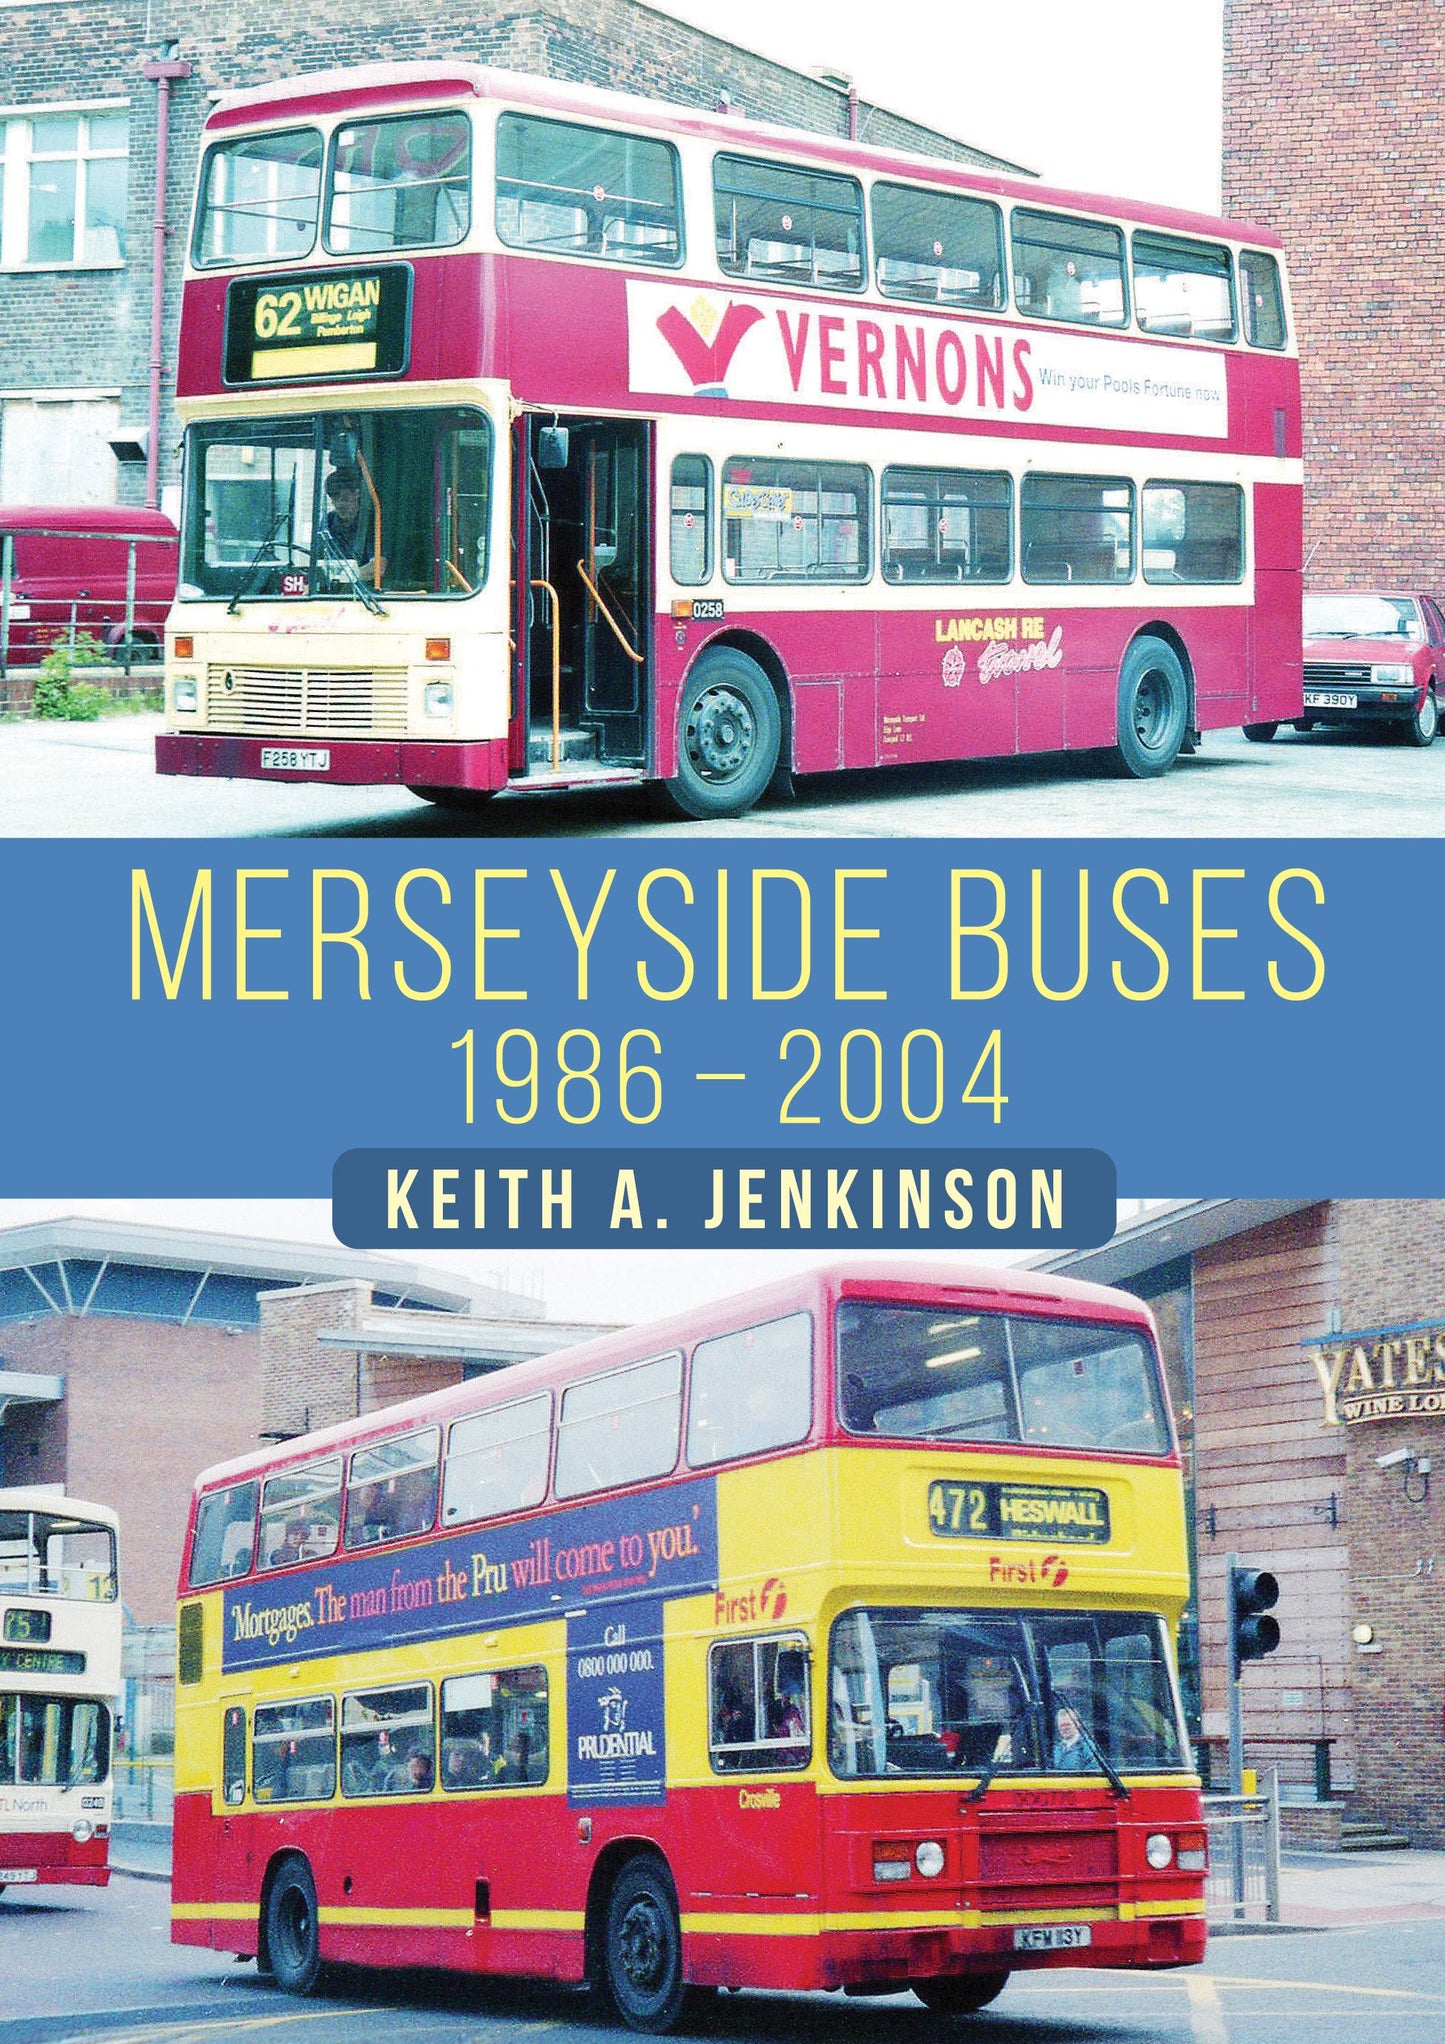 Merseyside Buses 1986-2004 - Keith A. Jenkinson - Chester Model Centre